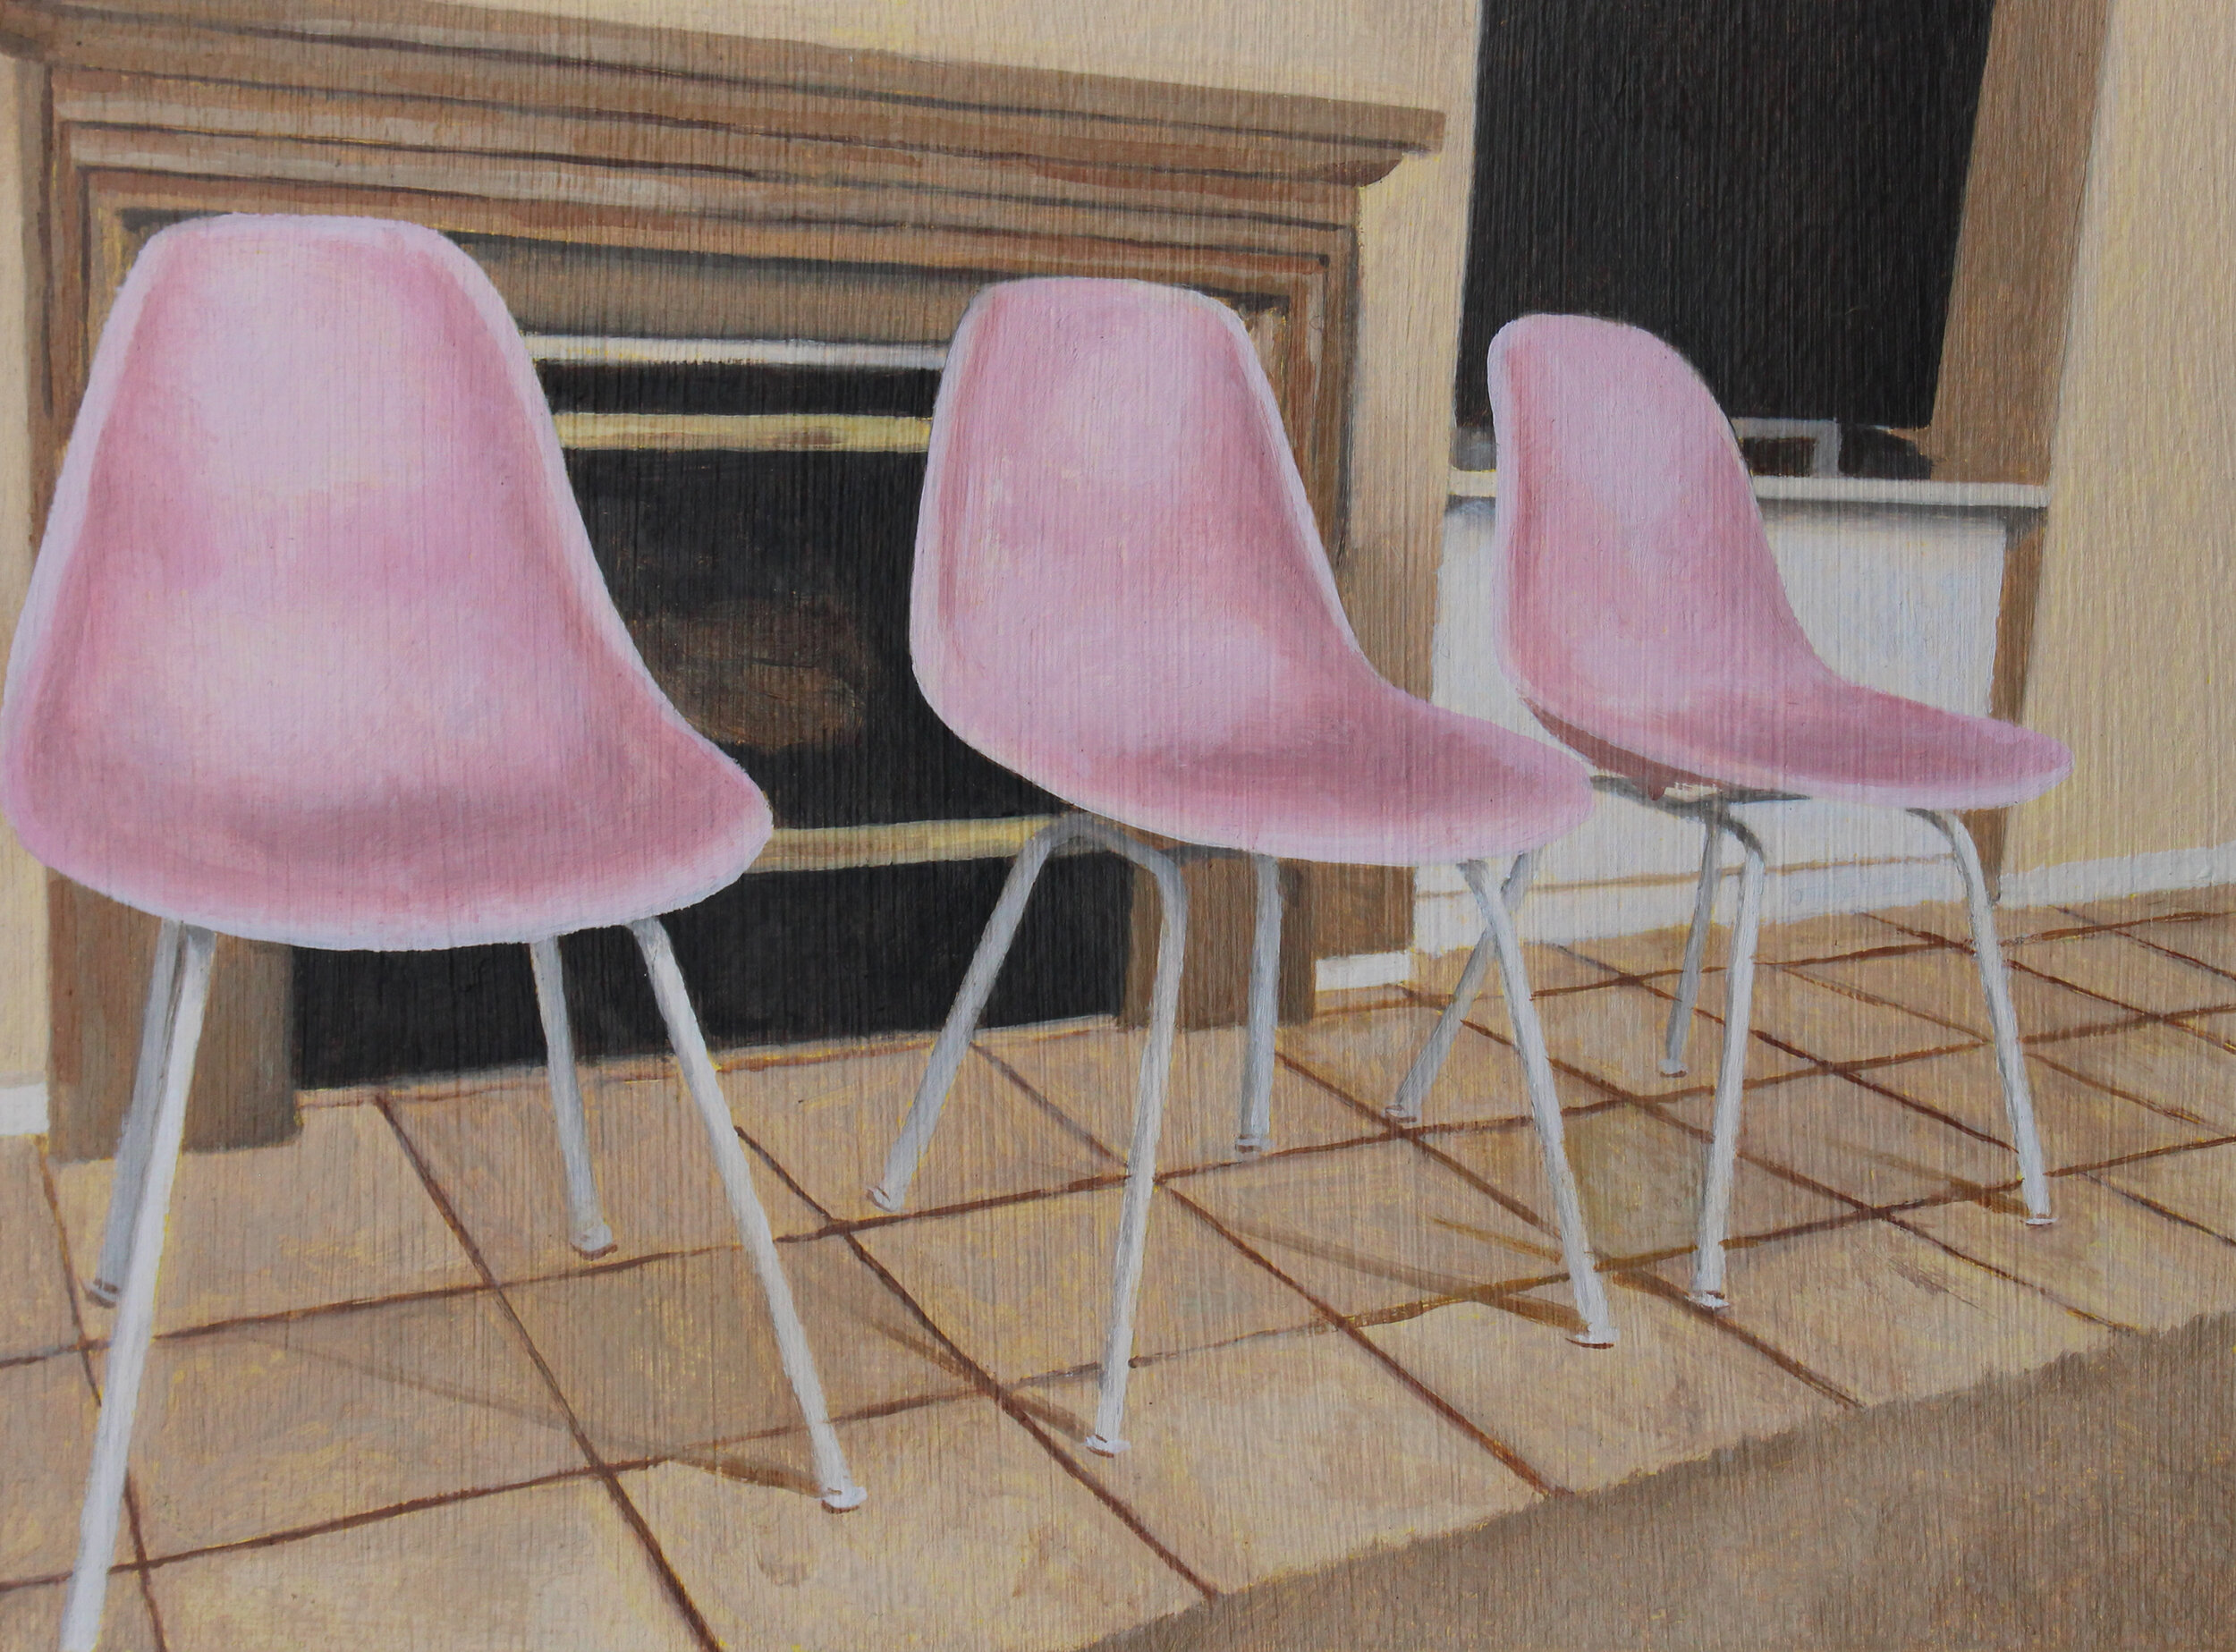  Chair 14, 2020  oil on paper  6 x 8 in 